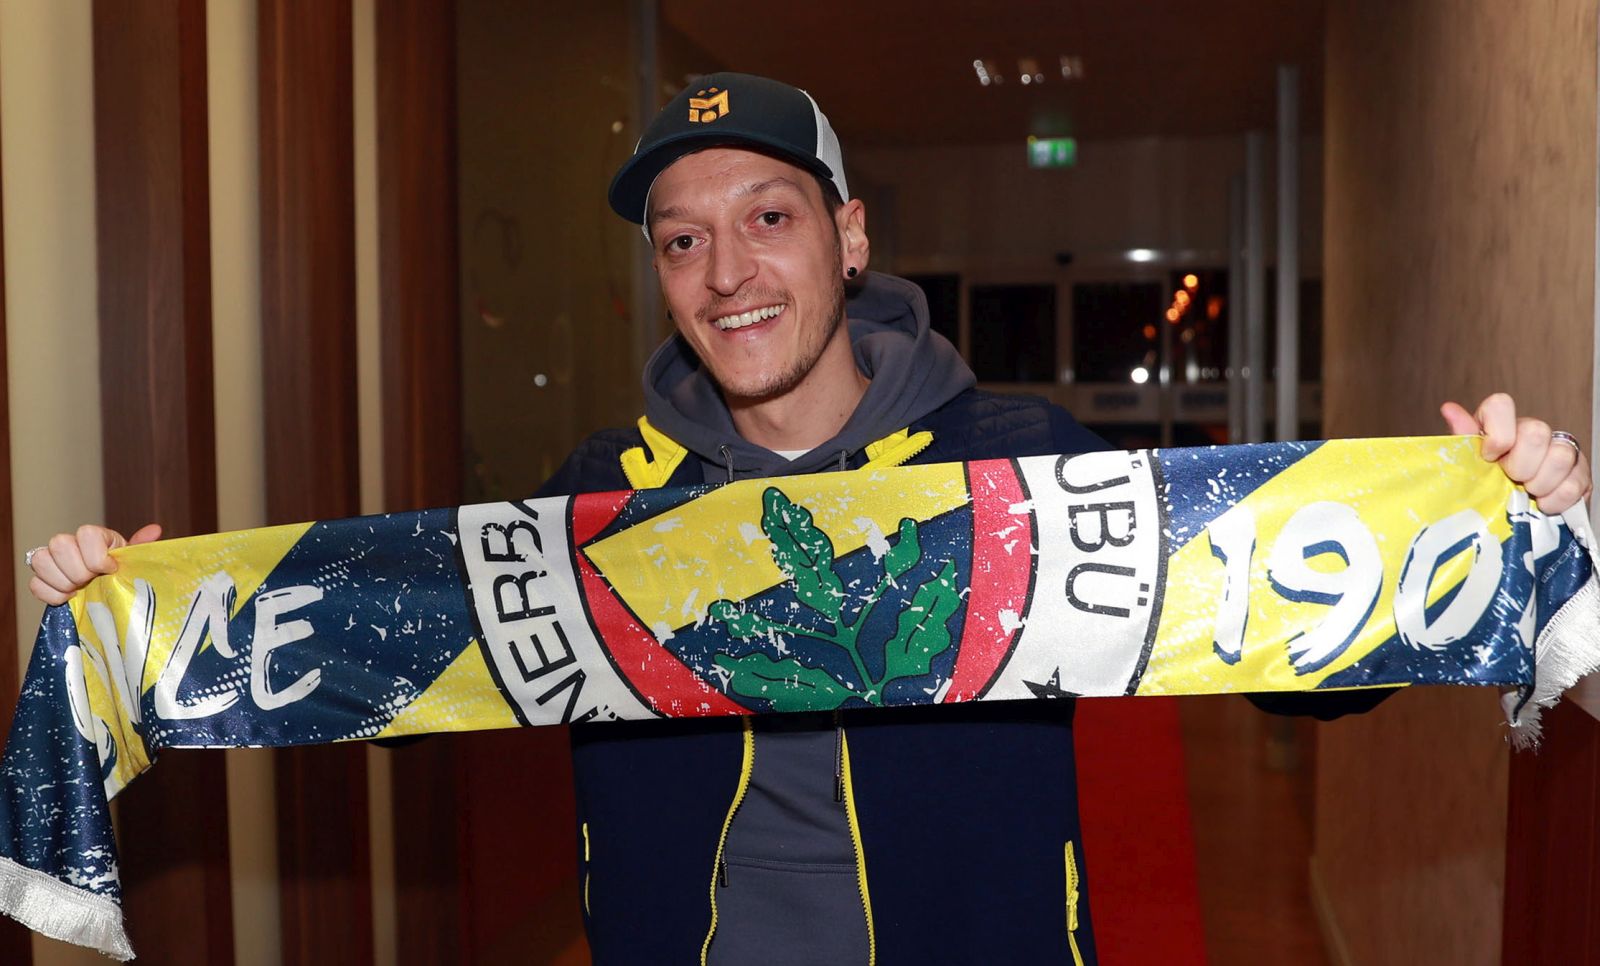 epa08945620 A handout photo made available by Fenerbahce soccer club shows soccer player Mesut Oezil posing with a Fenerbahce scarf upon his arrival to Istanbul, Turkey, 18 January 2021. 32-year-old German World Cup winner Mesut Oezil made an agreement with Arsenal to terminate his contract in order to complete his transfer to Fenerbahce.  EPA/-  HANDOUT EDITORIAL USE ONLY/NO SALES